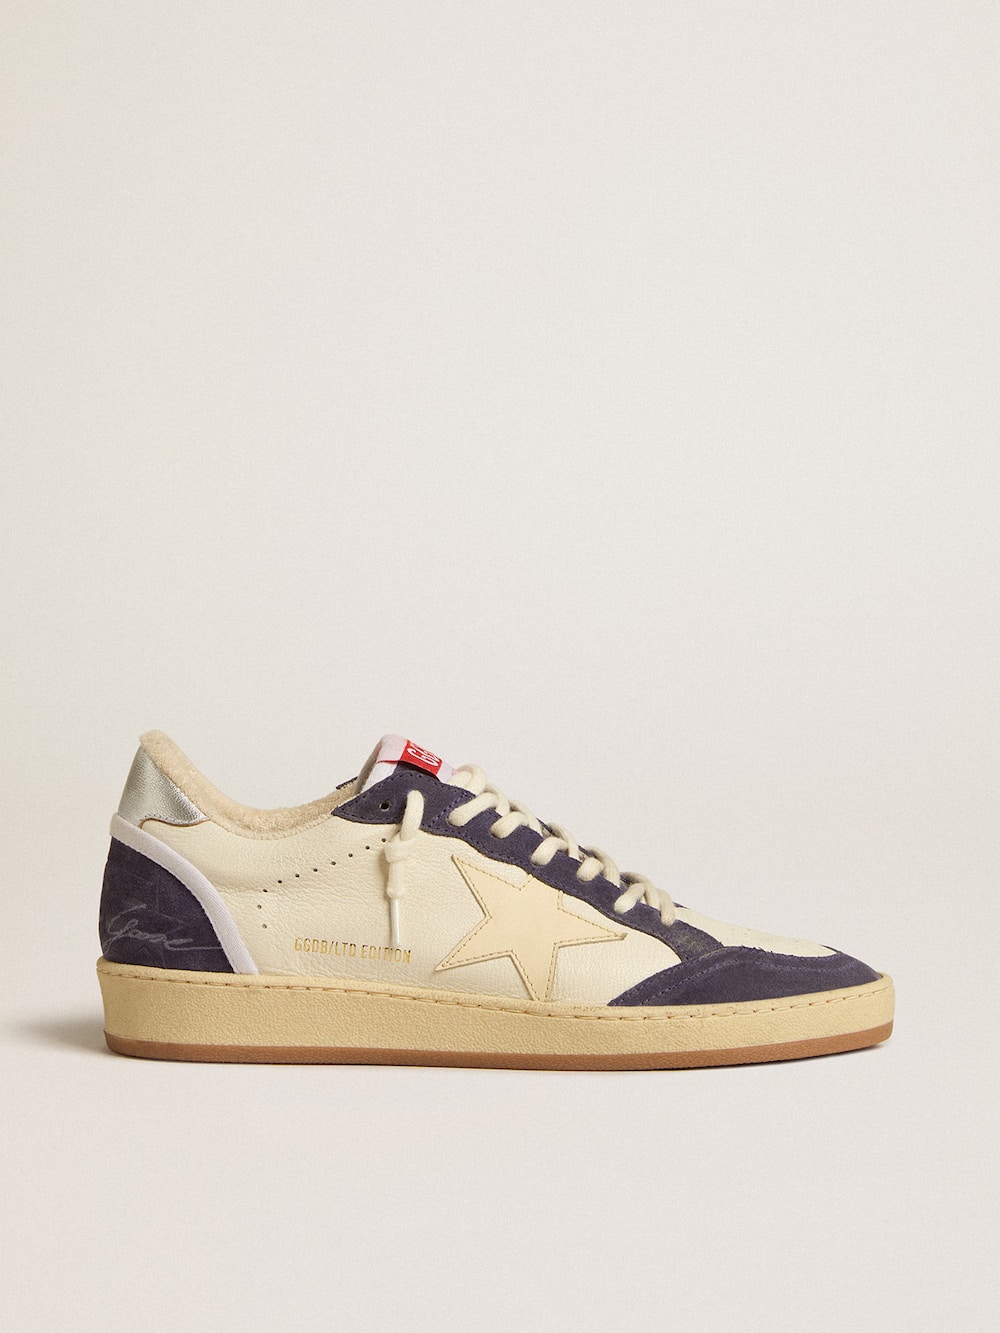 Golden Goose - Ball Star LTD in nappa leather and suede with cream star and silver heel tab in 